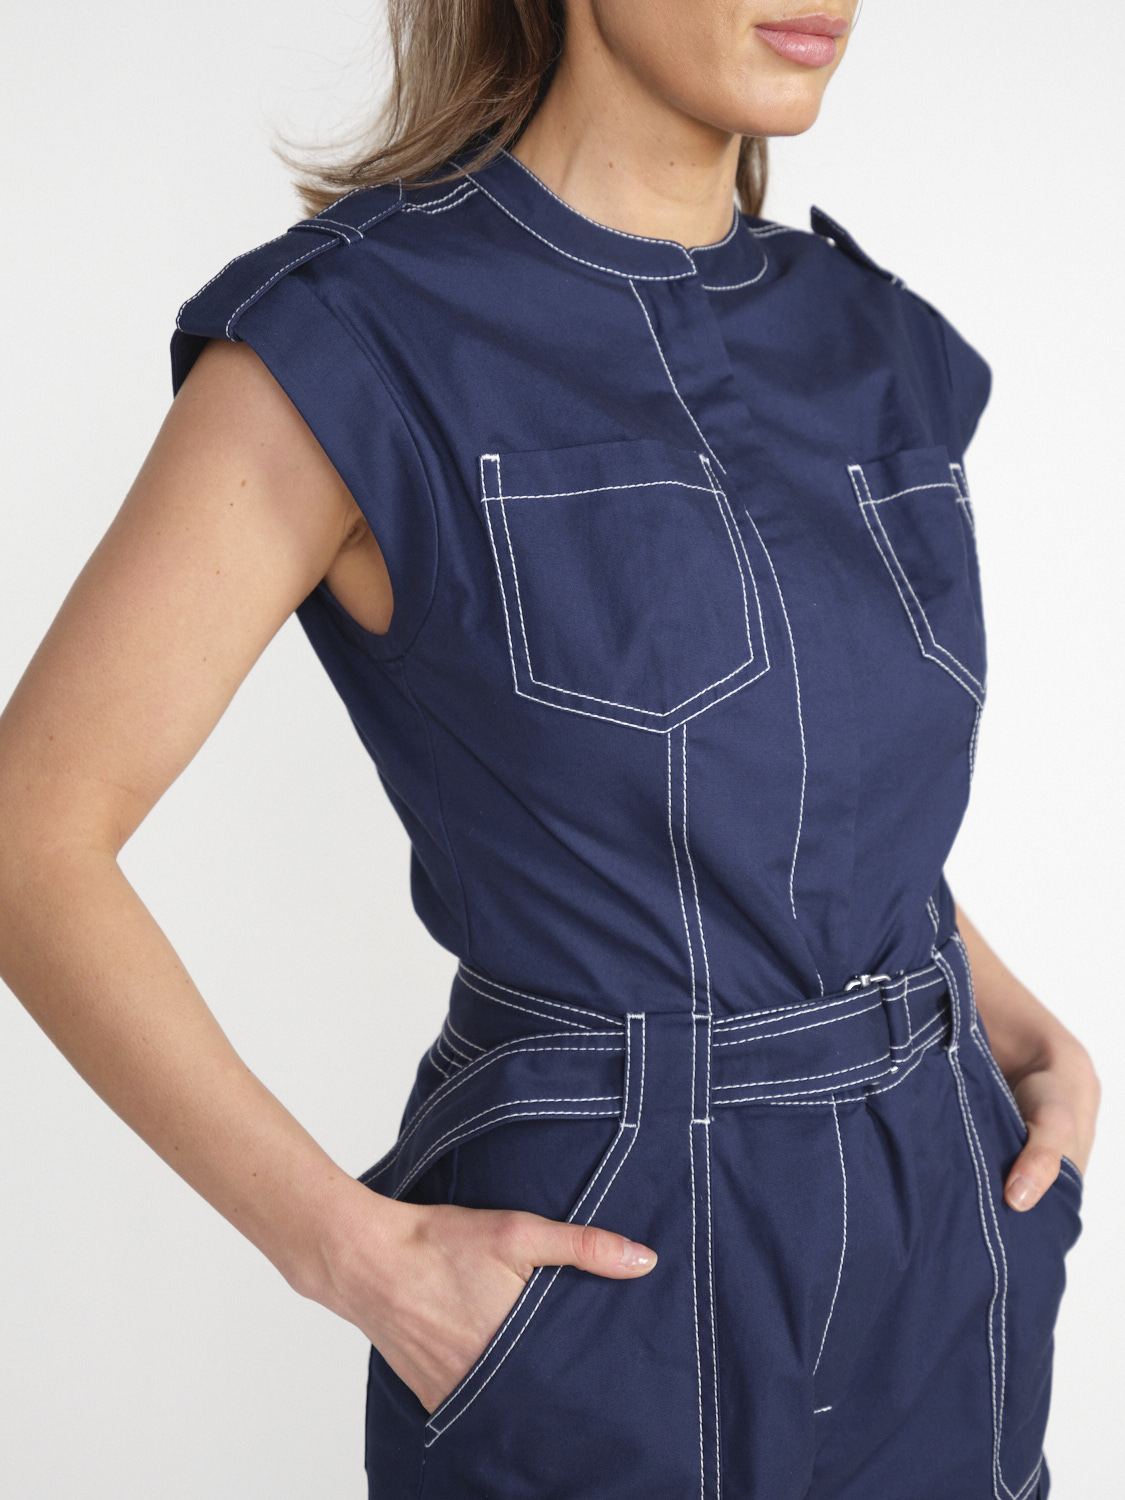 Simkhai Tinka – jumpsuit with white sewing detail  blue 34